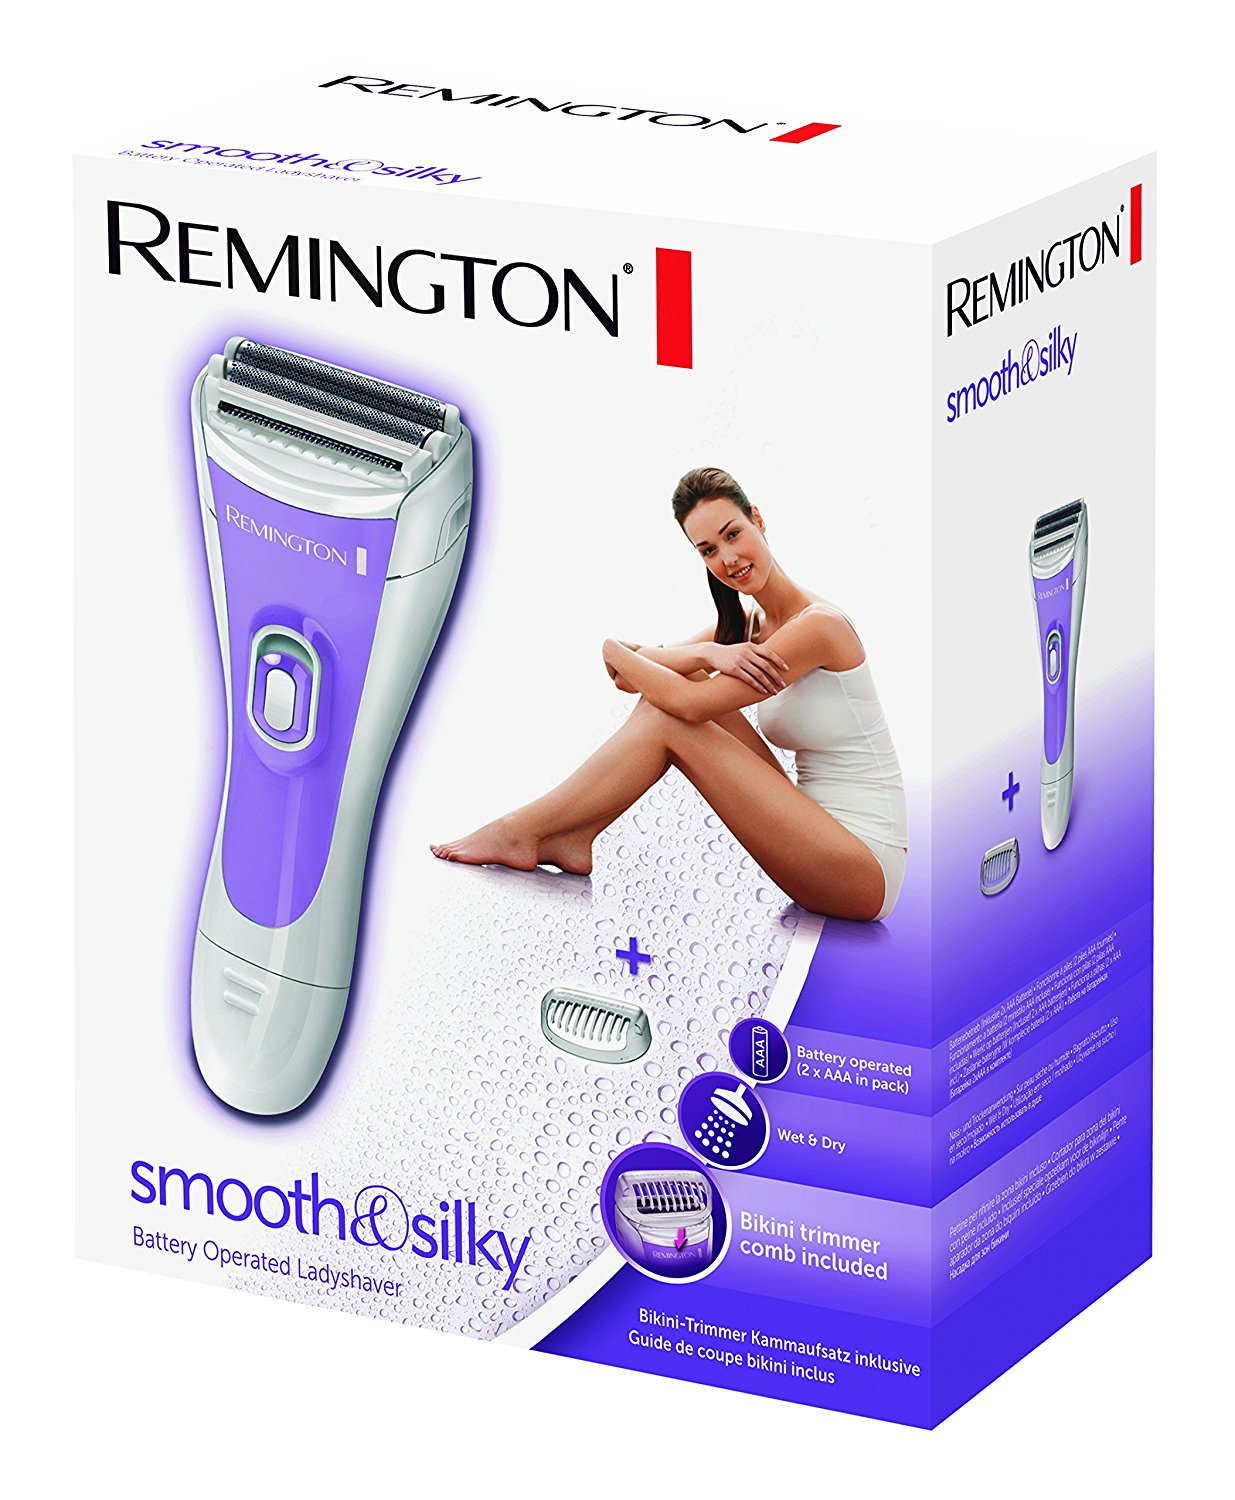 Remington Smooth & Silky Battery Operated Ladyshaver